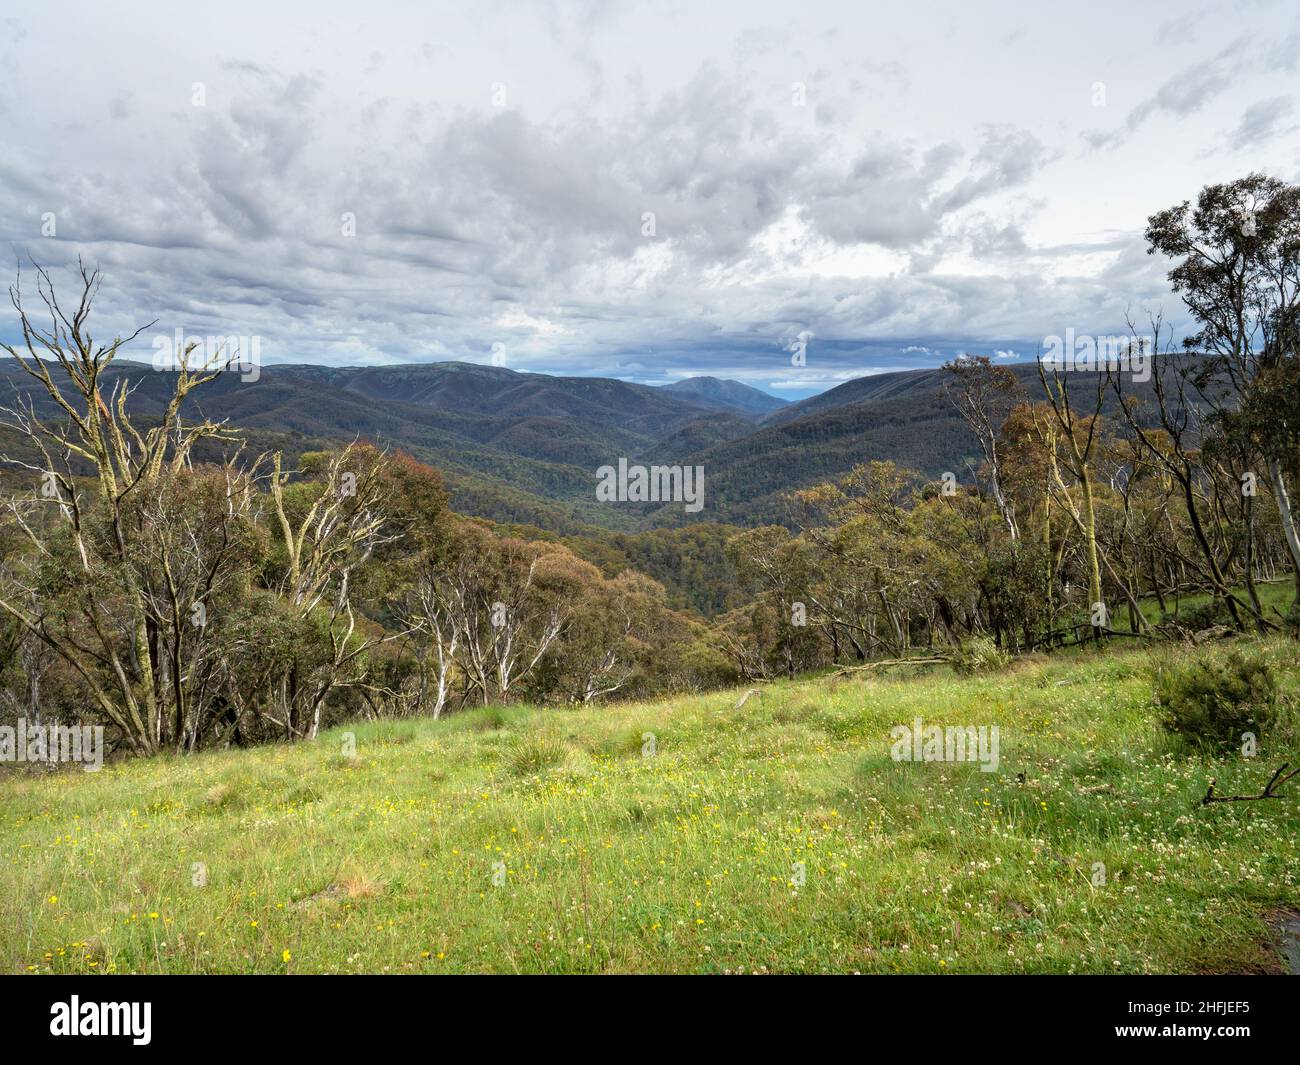 The view along the 'Room with A View' walking trail at Dinner Plain, Victoria, Australia. Stock Photo